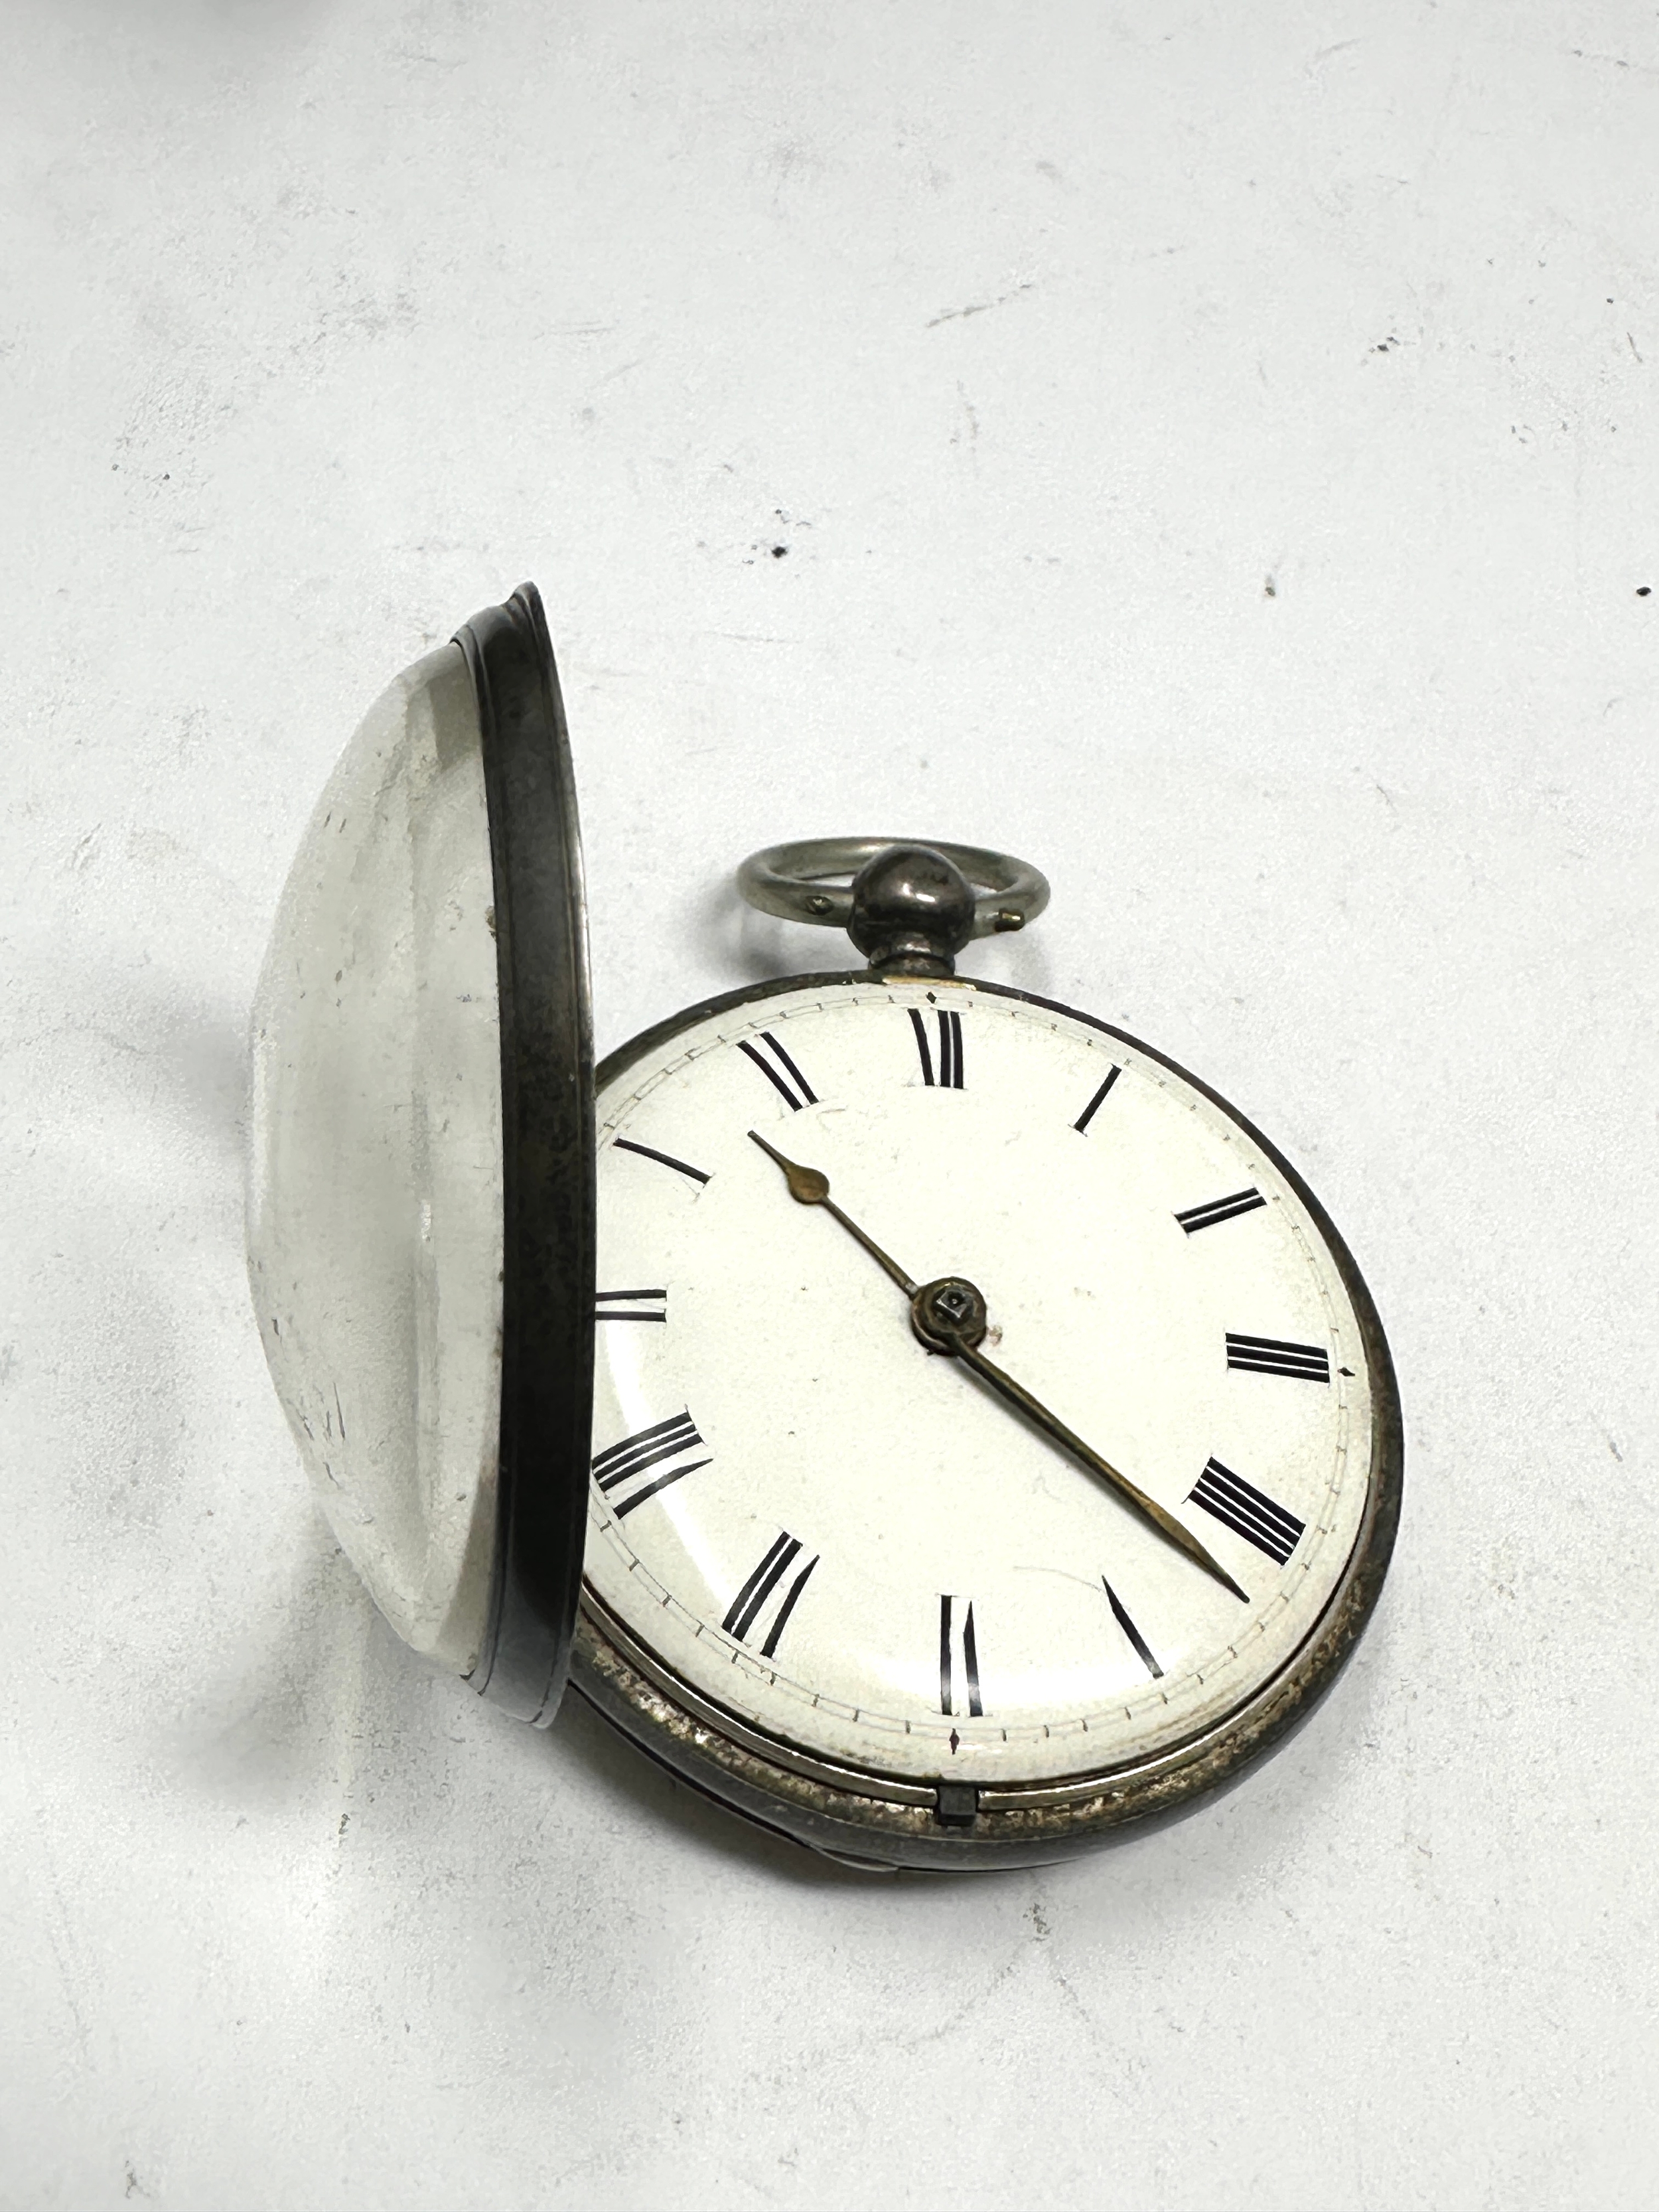 Antique silver open face fusee verge pocket watch ware & son London movement the watch is not - Image 3 of 5